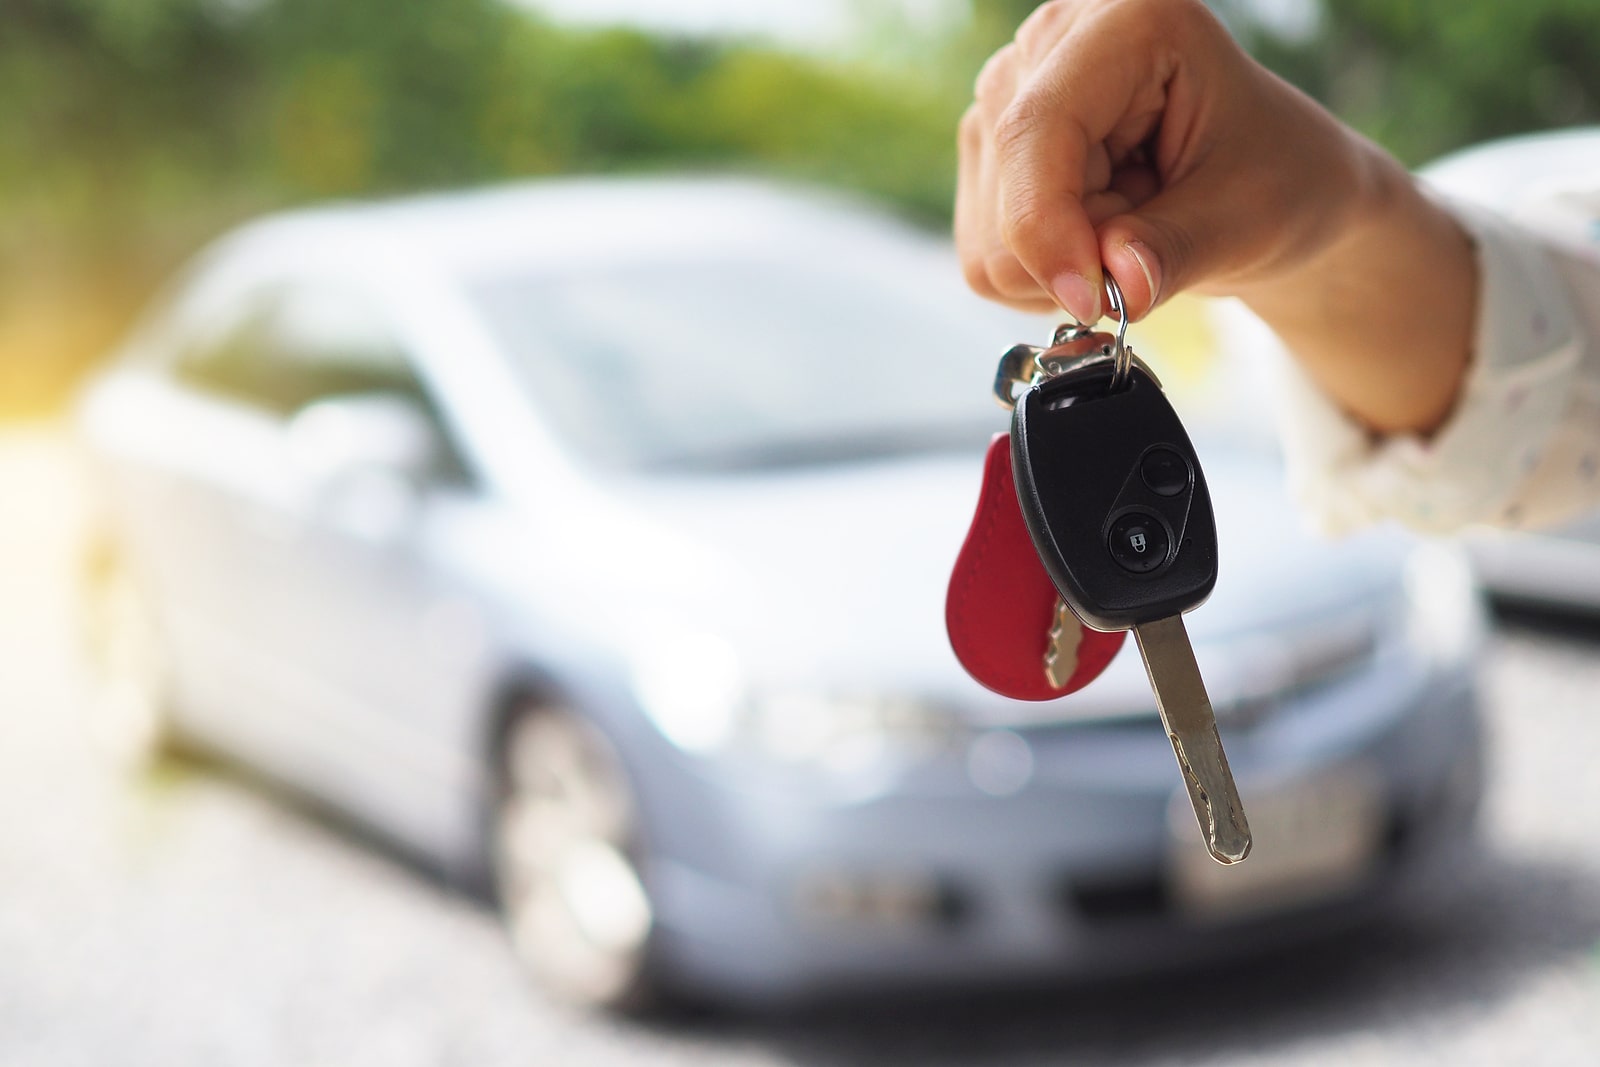 What To Look For When Buying a Used Car: A Checklist